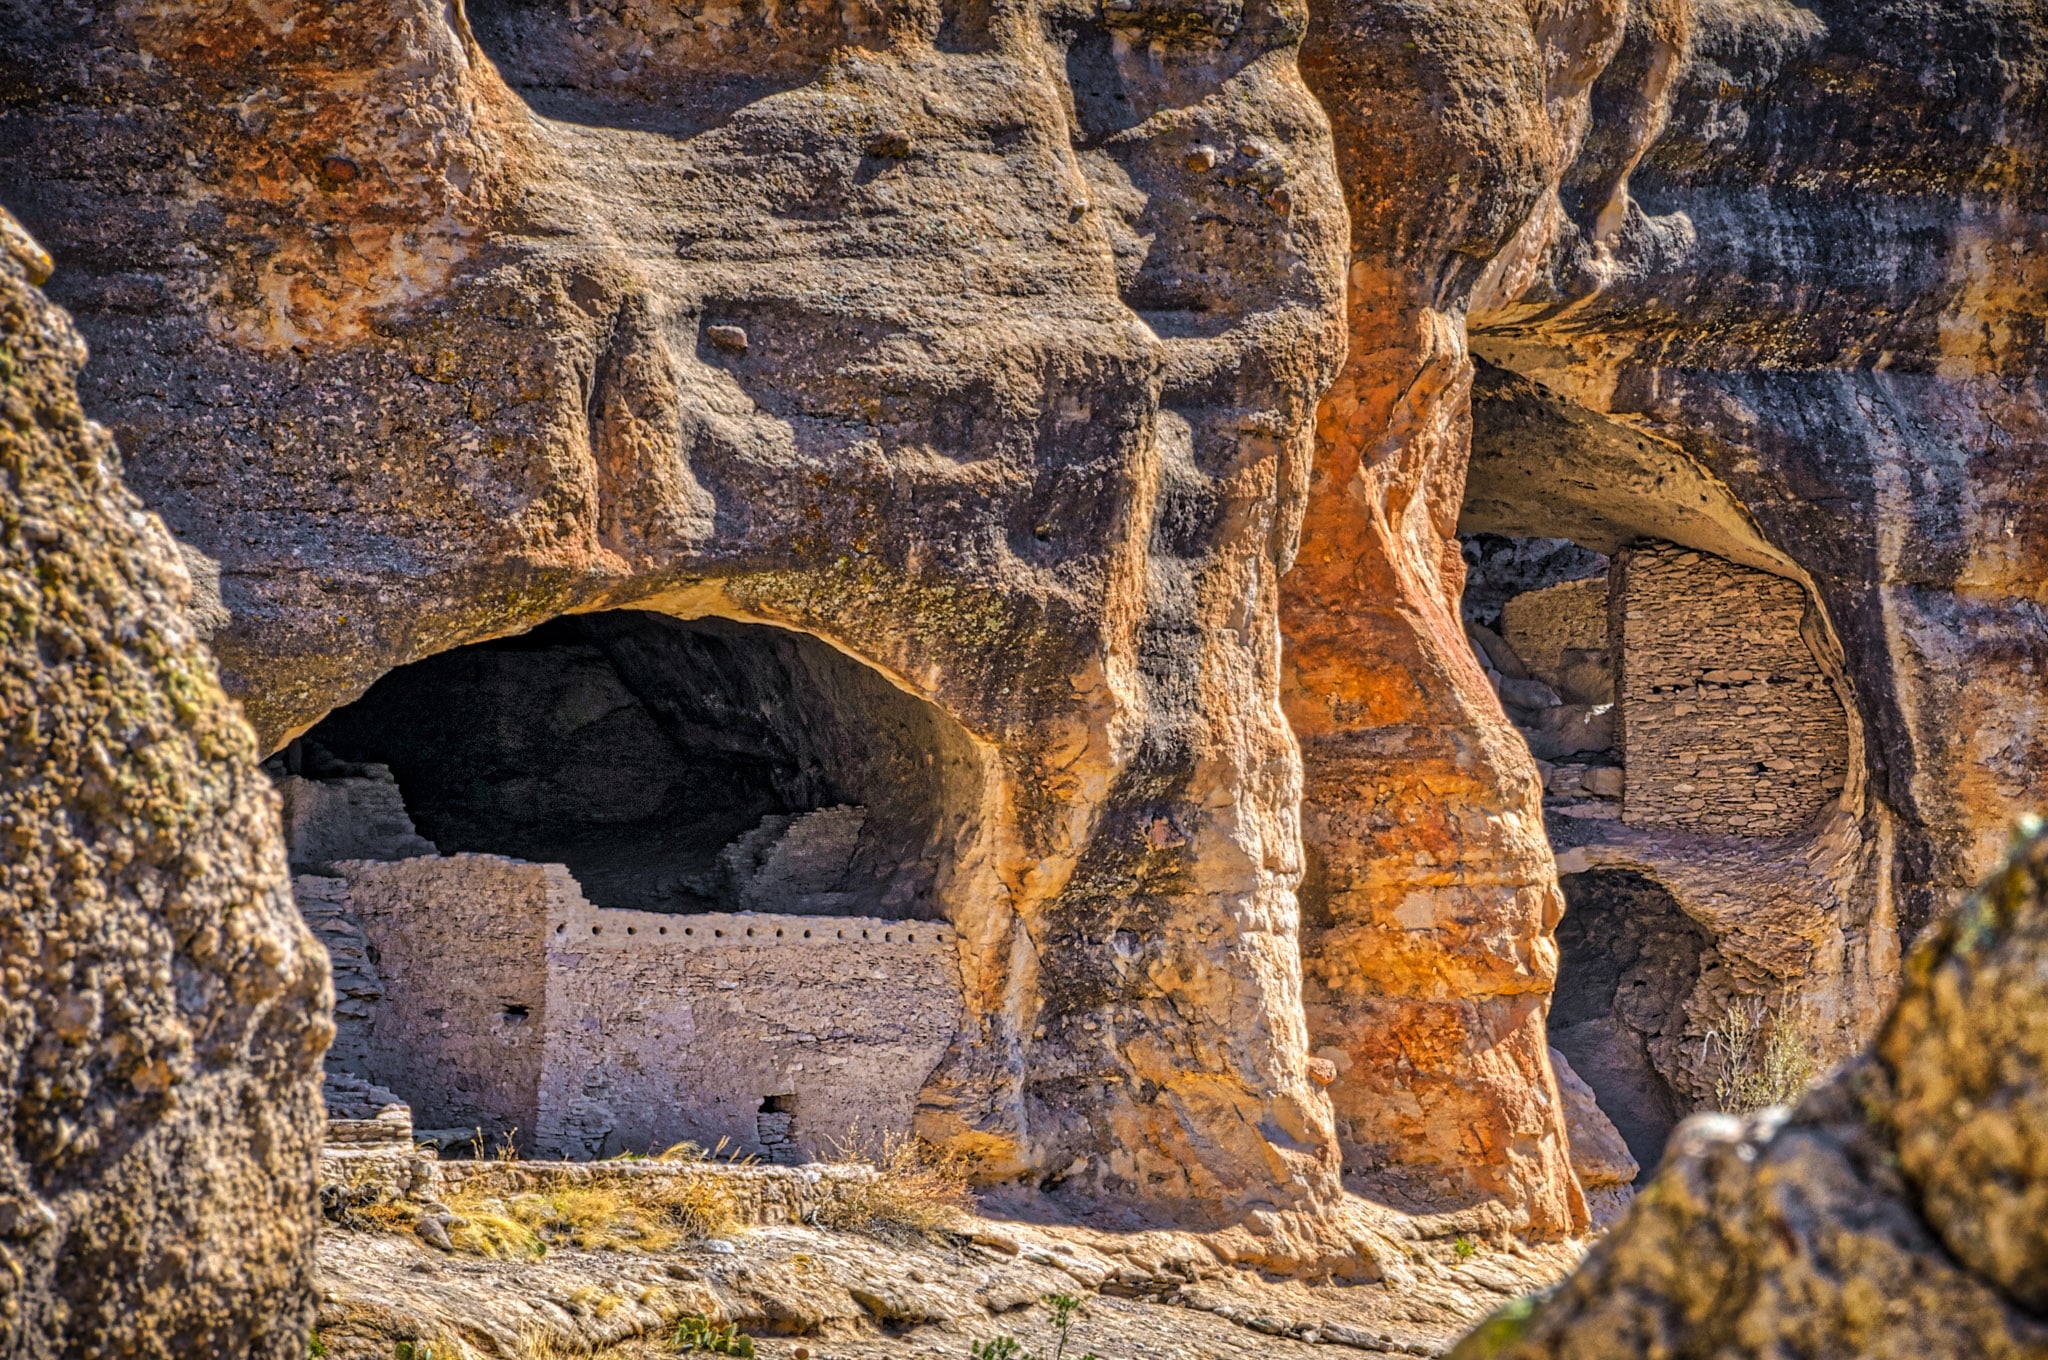 Close-up of the exterior of Gila Cliff Dwellings in Gila Cliff Dwellings National Monument near Silver City, New Mexico.